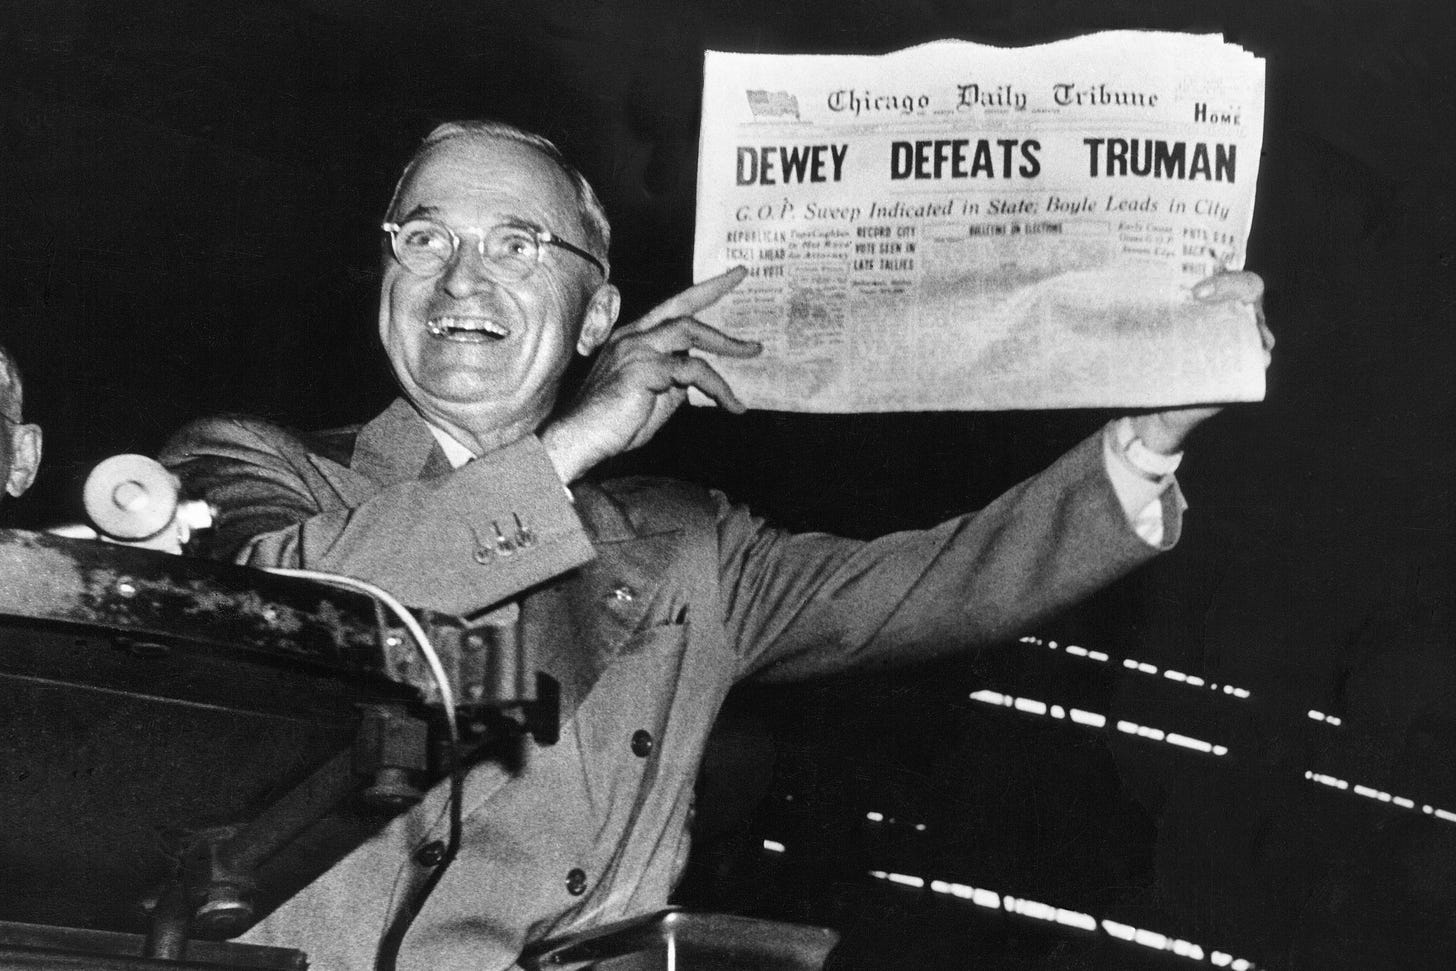 Dewey defeats Truman&#39;: Why the 1948 election matters in 2020 | Fortune